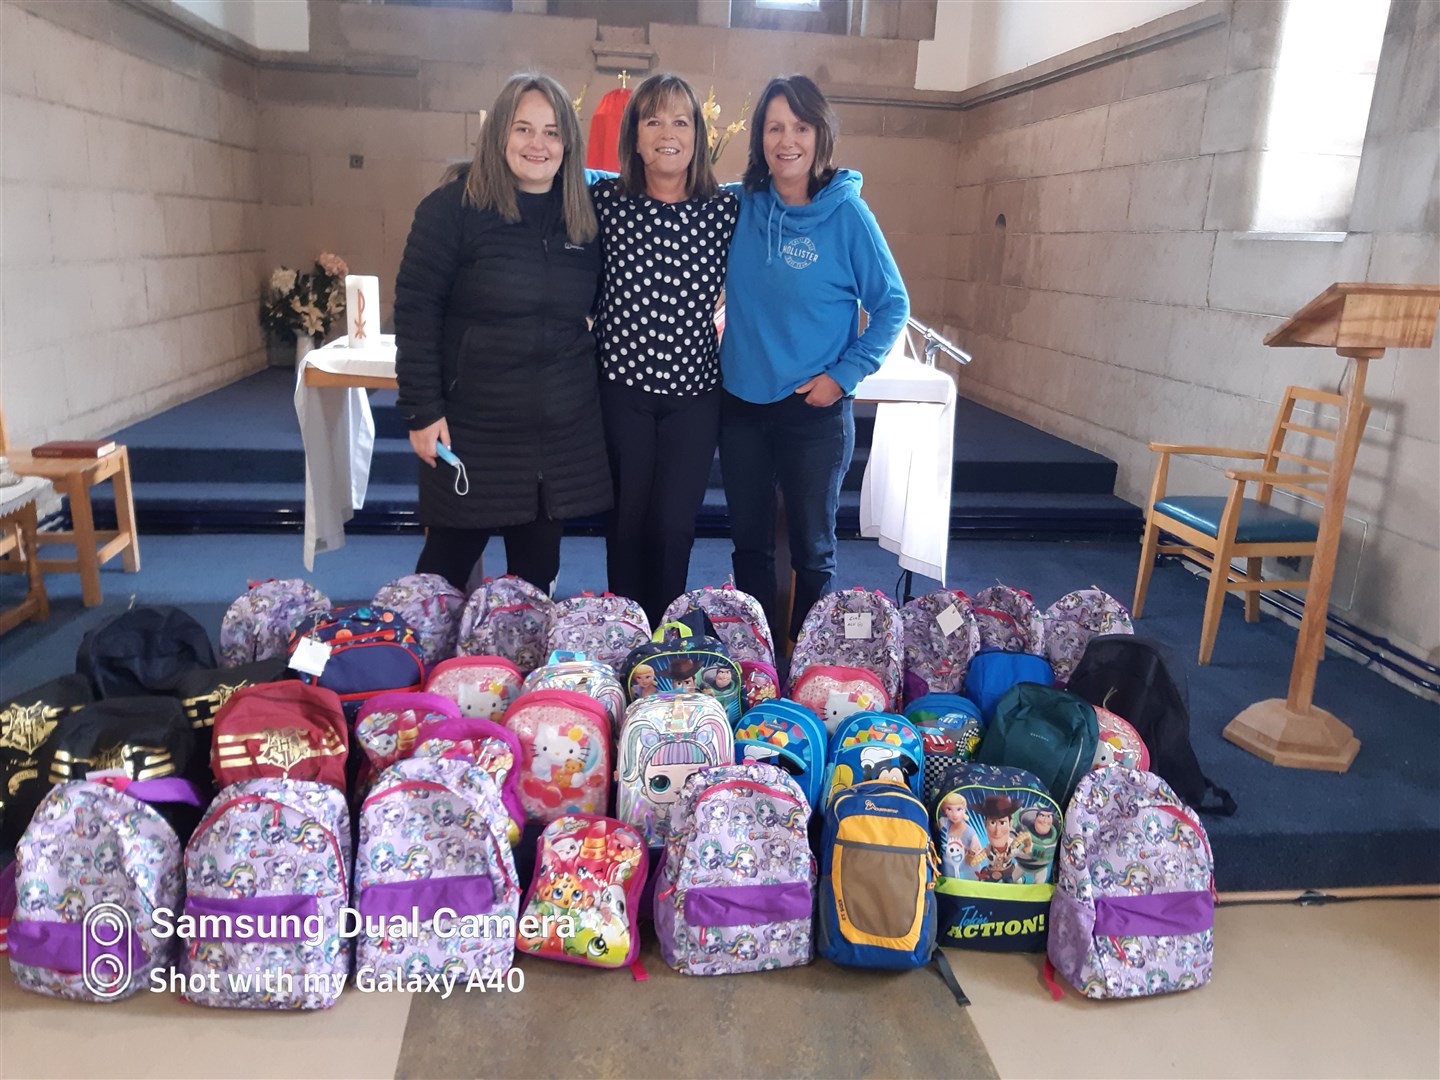 Derick’s family delivering the 39 backpacks: Romy Paxton, Karen Smith and Trish Fell.